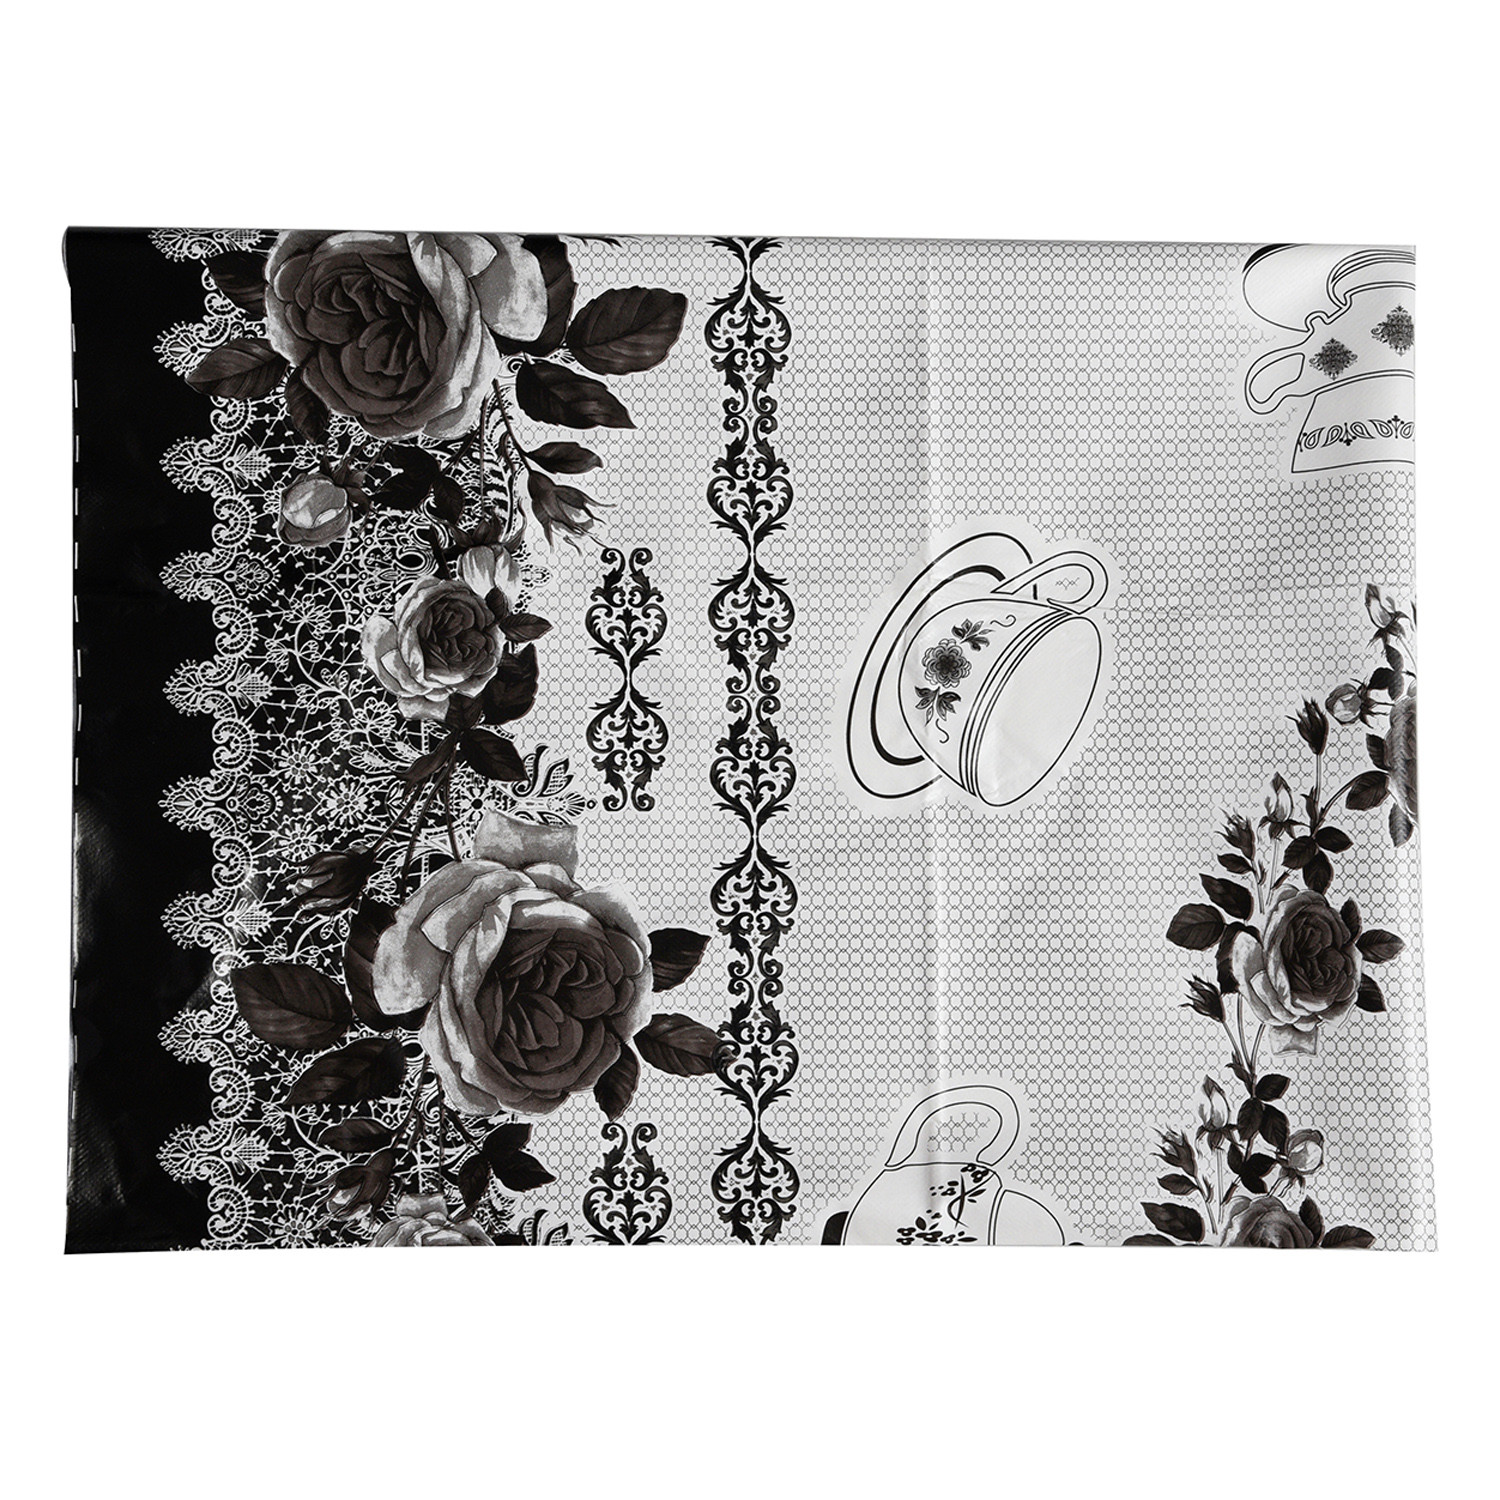 Kuber Industries Center Table Cover | PVC Cup Design with Floral Border Table Cover | Luxurious Table Protector Cover Without Lace for Home | 40x60 Inch | Black